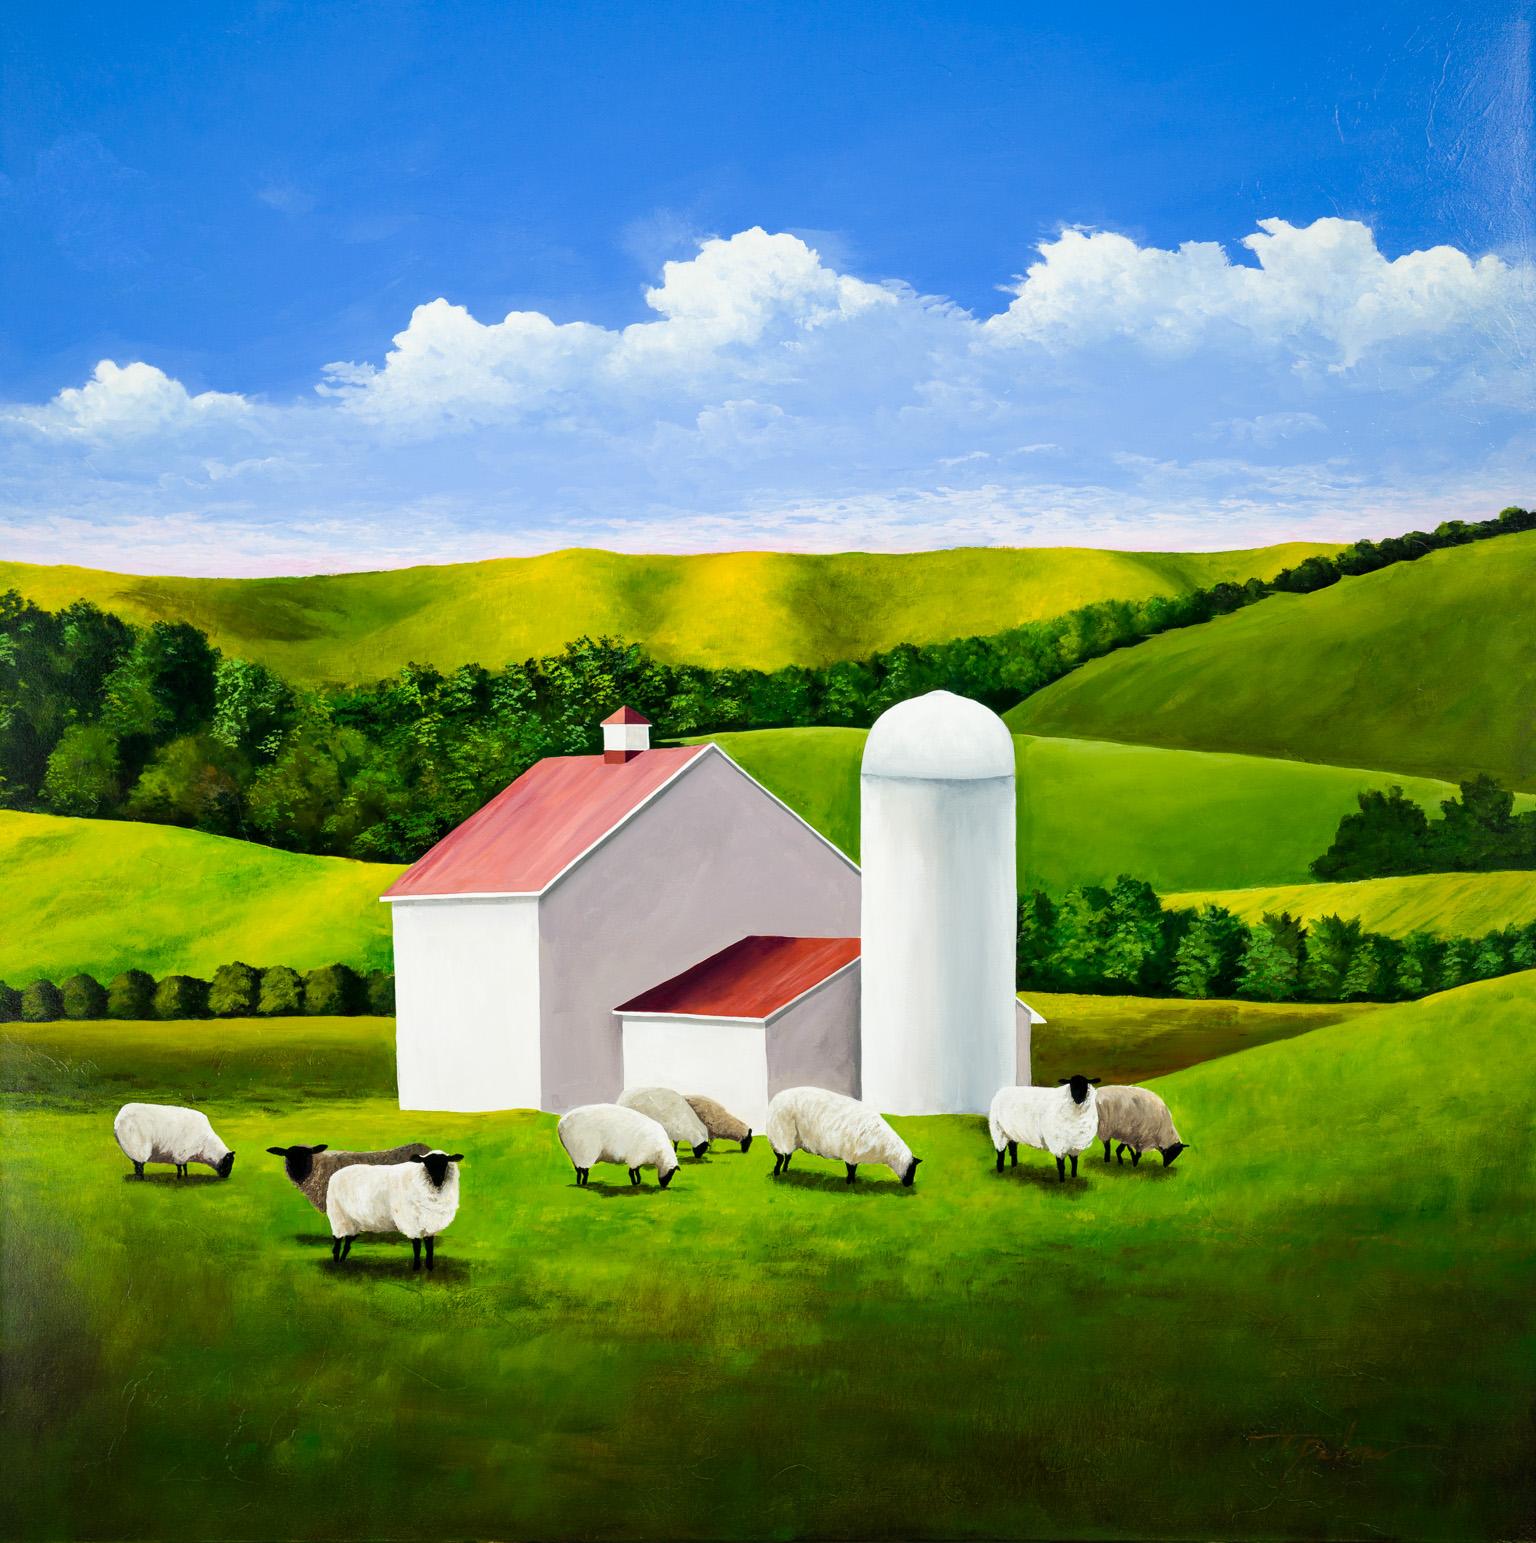 Sheep in the Pasture - Painting by Tina Palmer